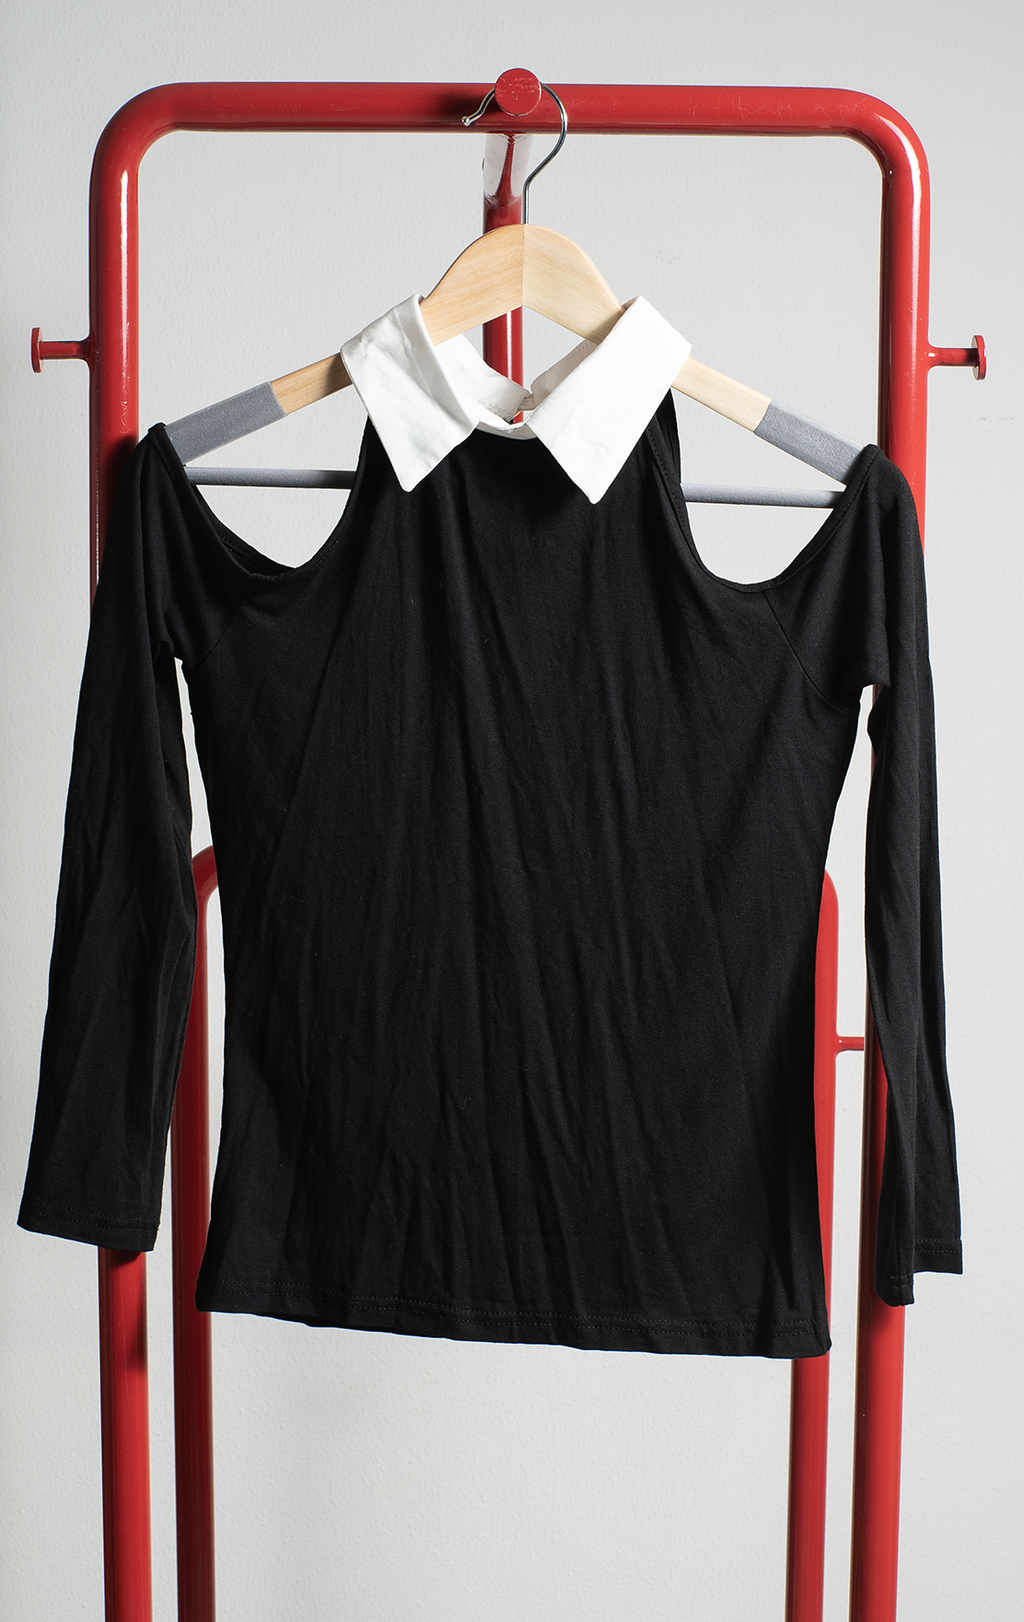 TOP - Black with white collar & cut outs - Small